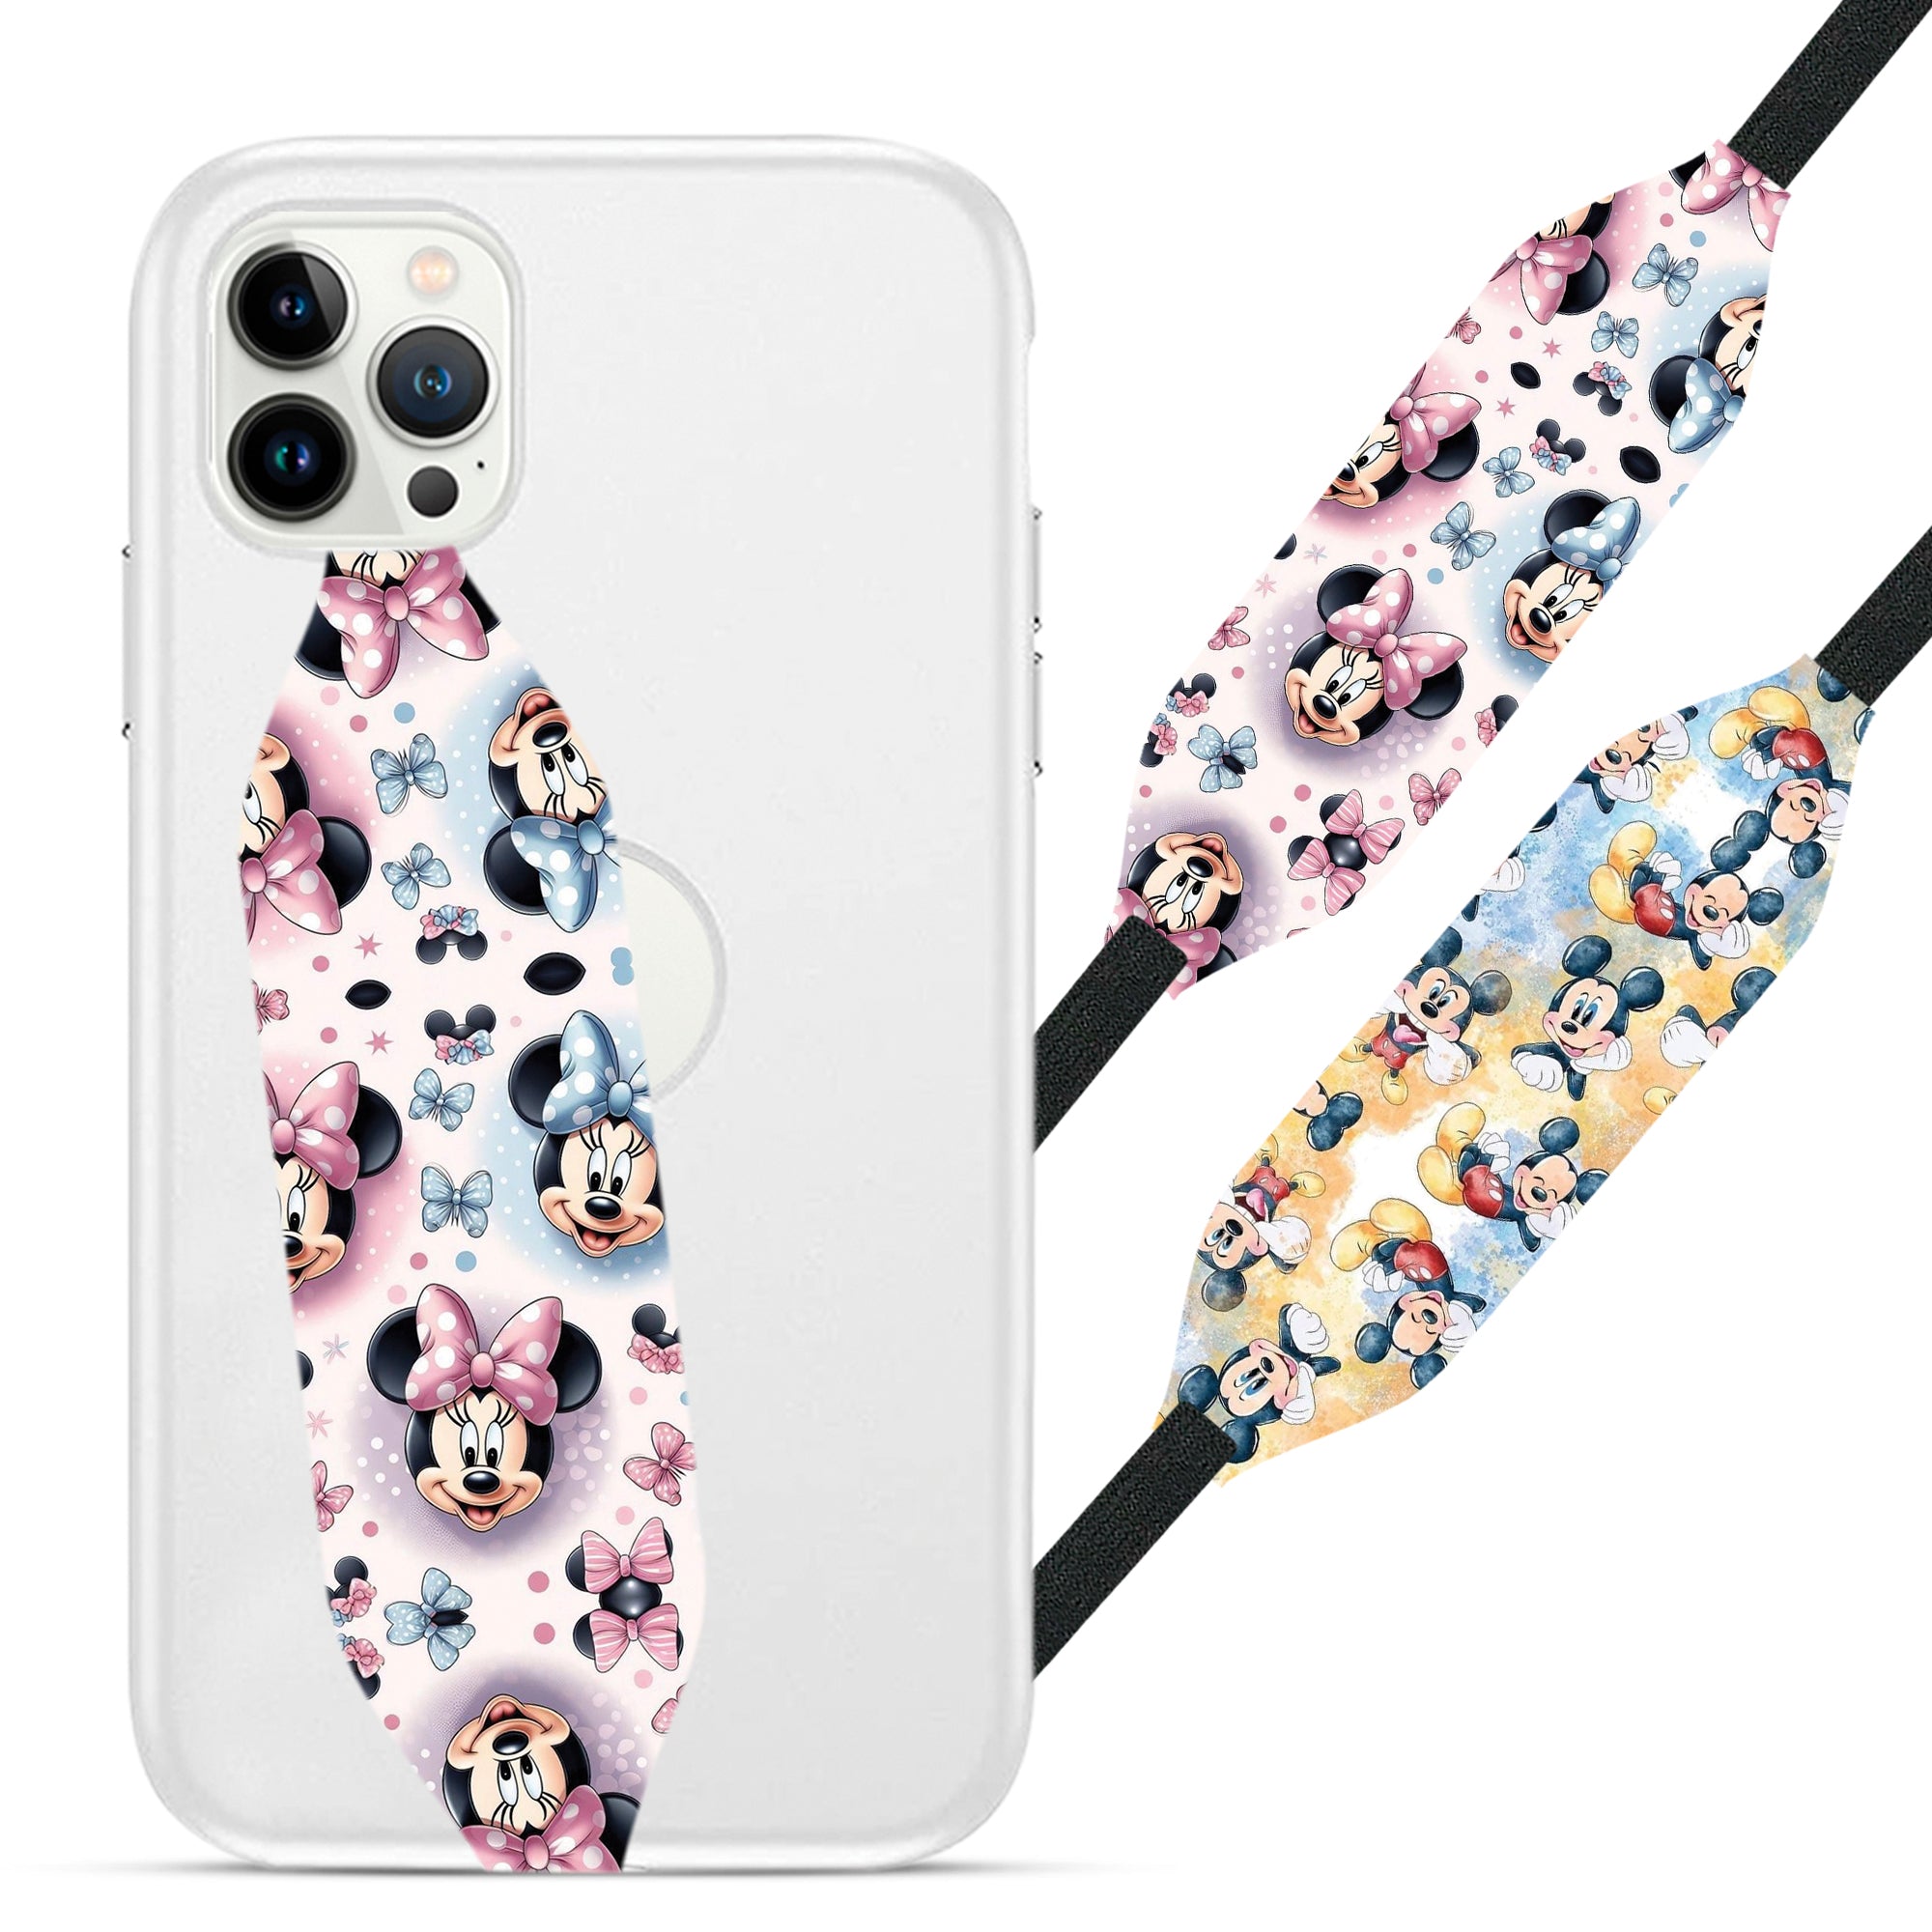 Universal Phone Grip Strap - Micky Mouse